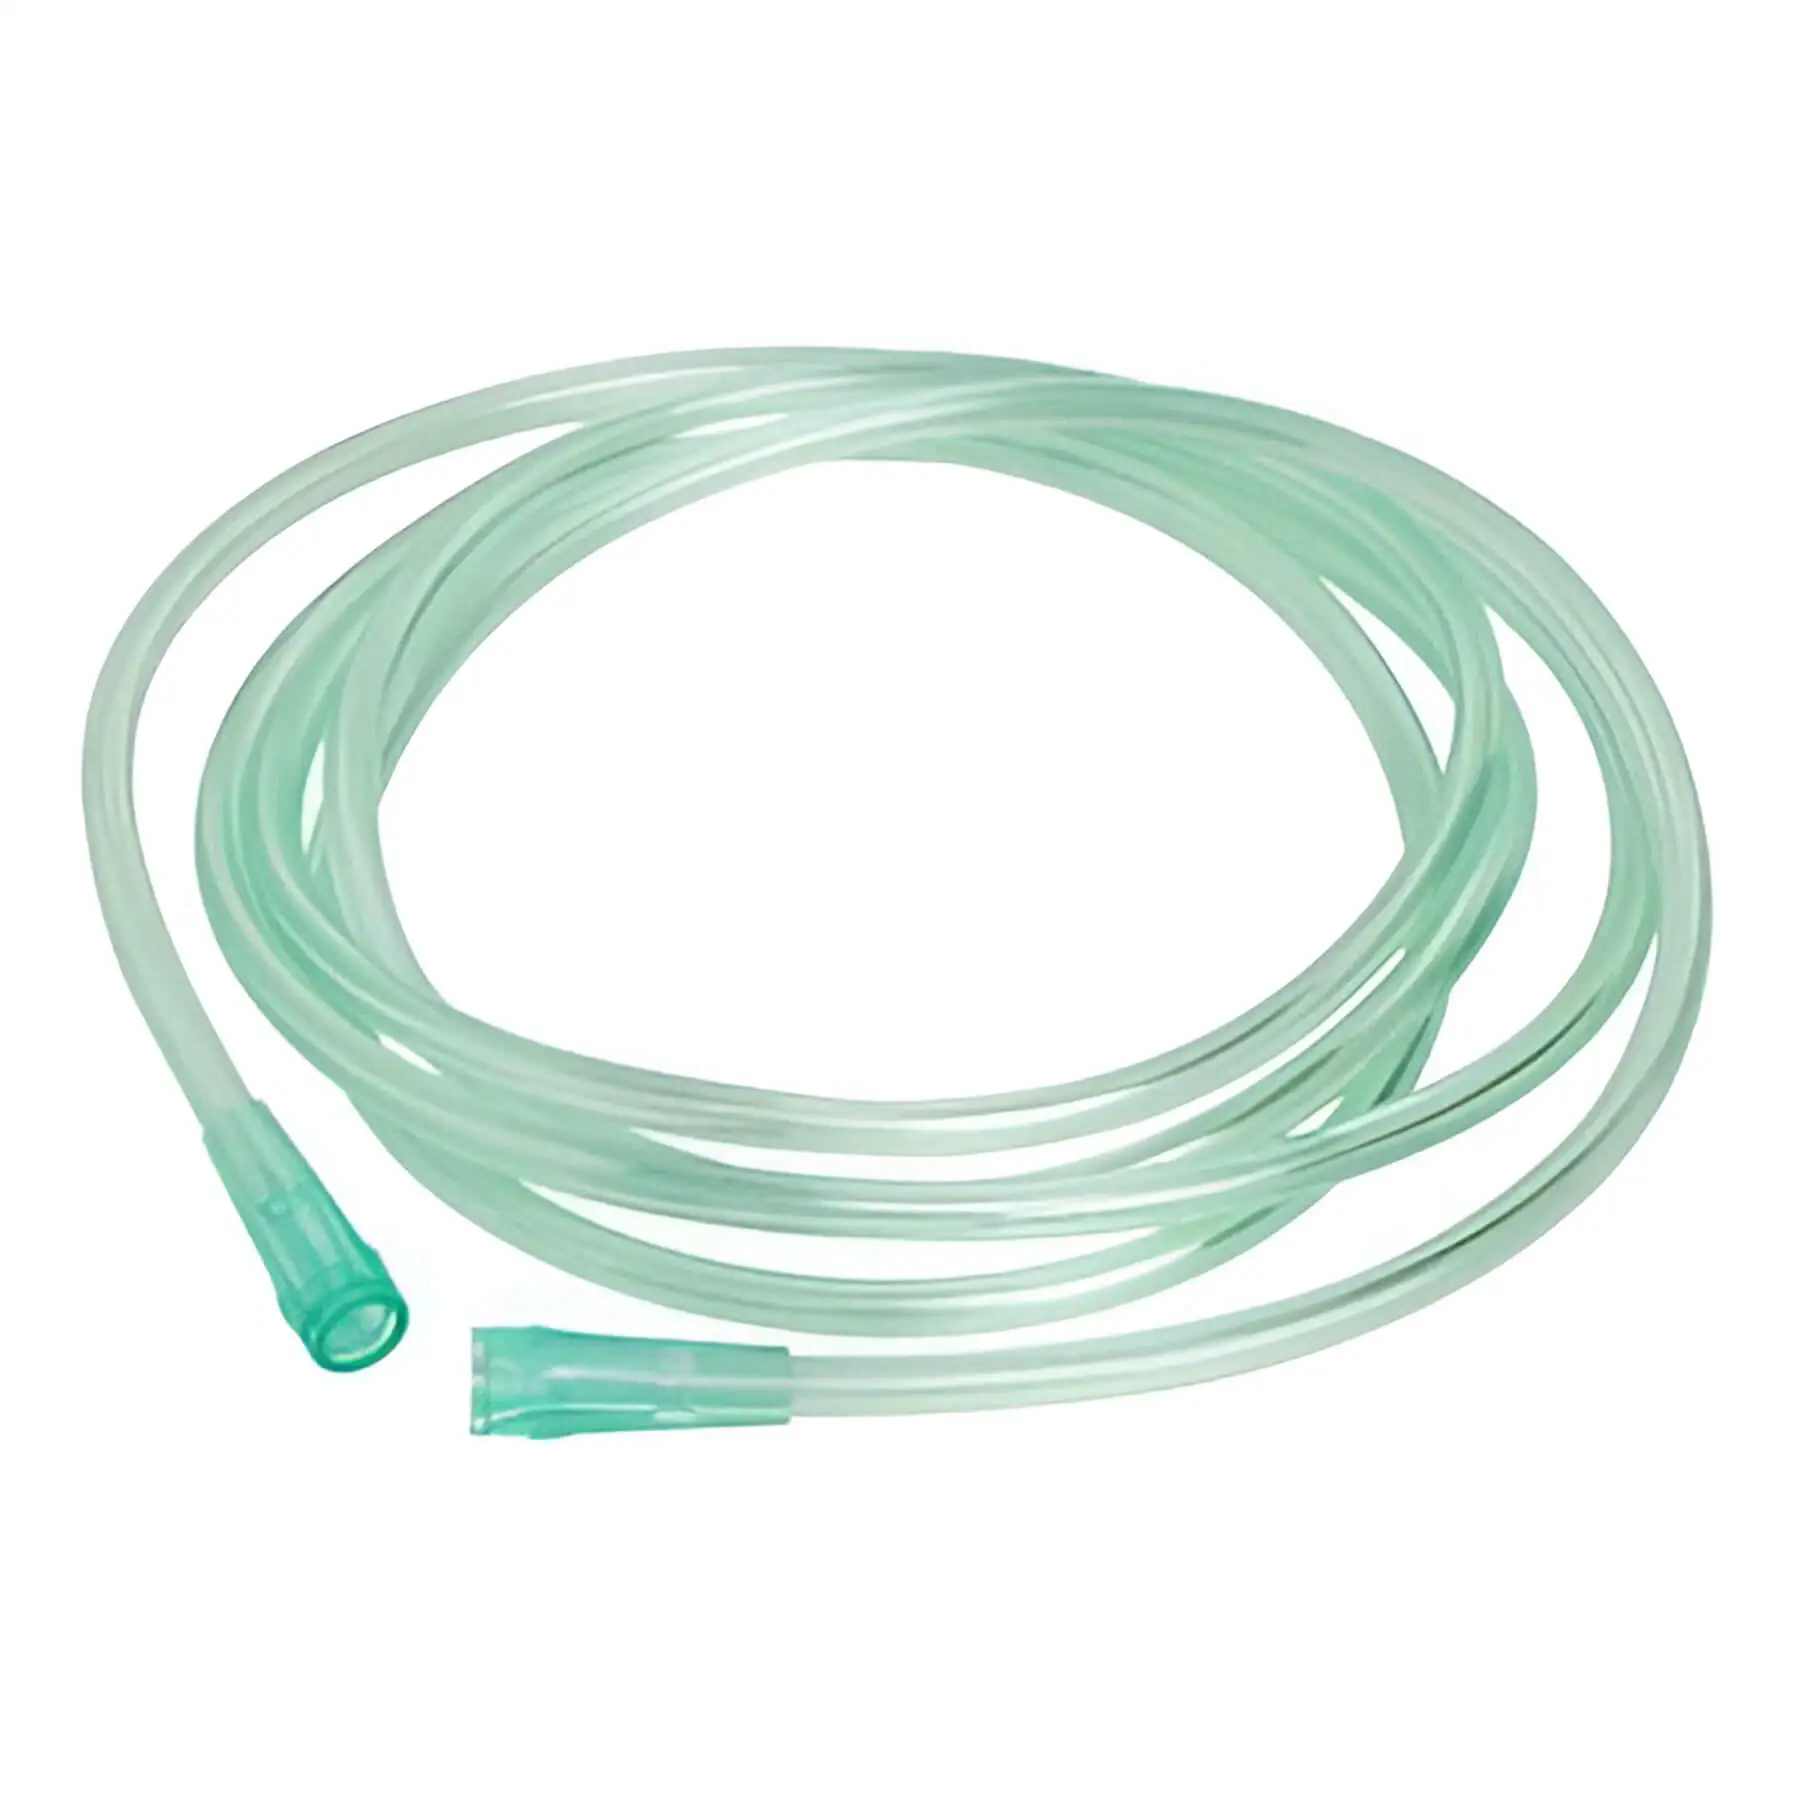 Oxygen Supply Extension Tubing 7 Foot for Oxygen concentrator or tank